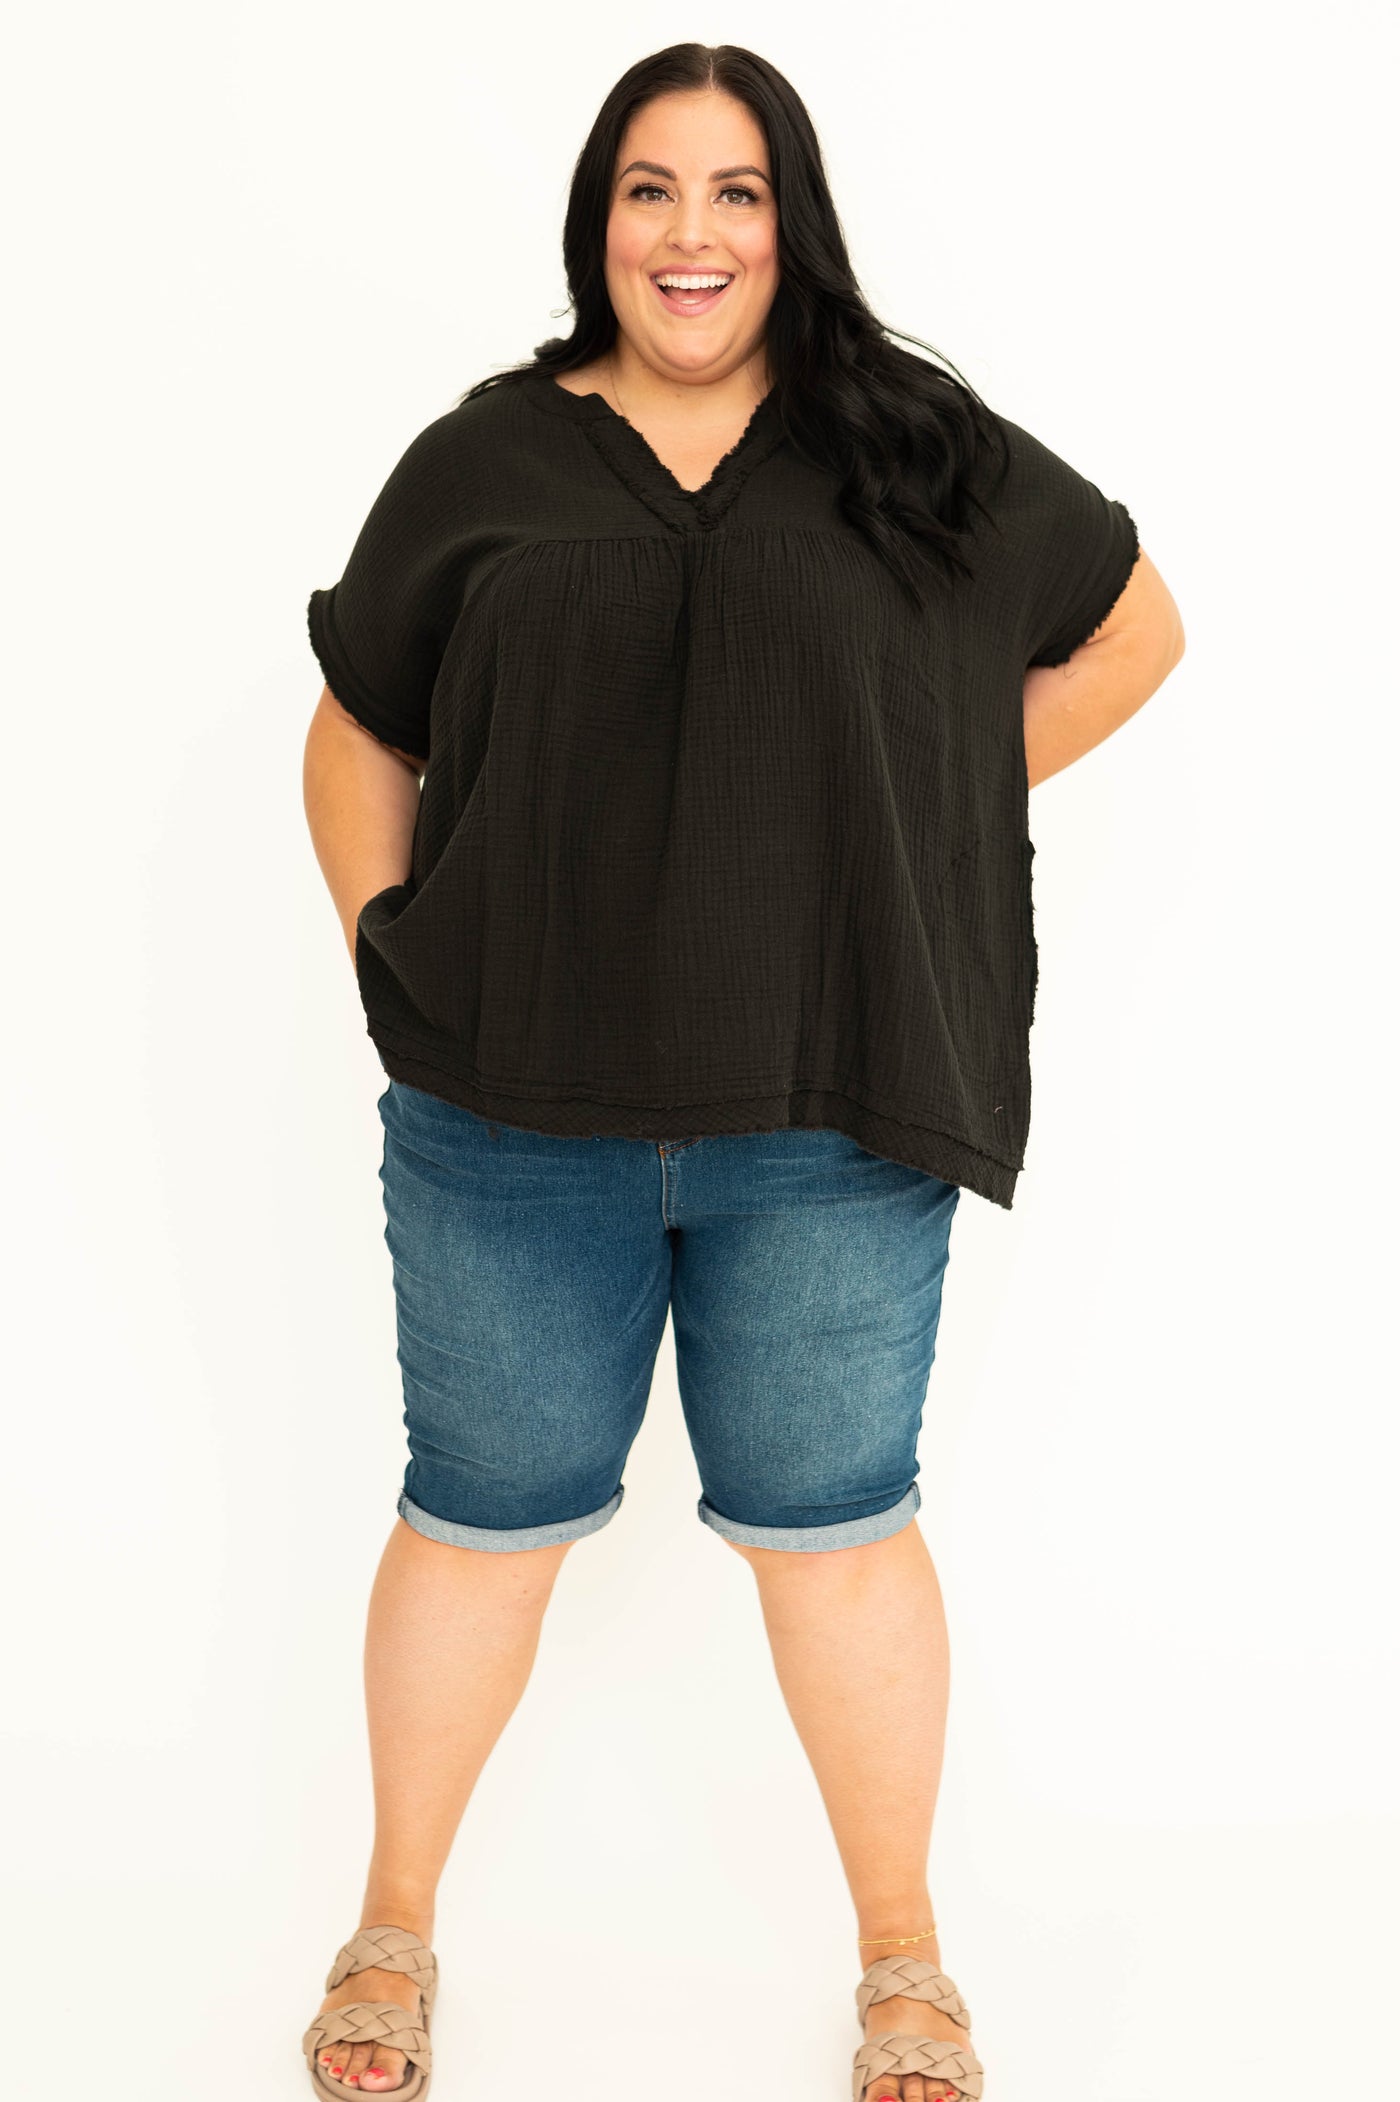 Plus size gauze top with a v-neck and pockets